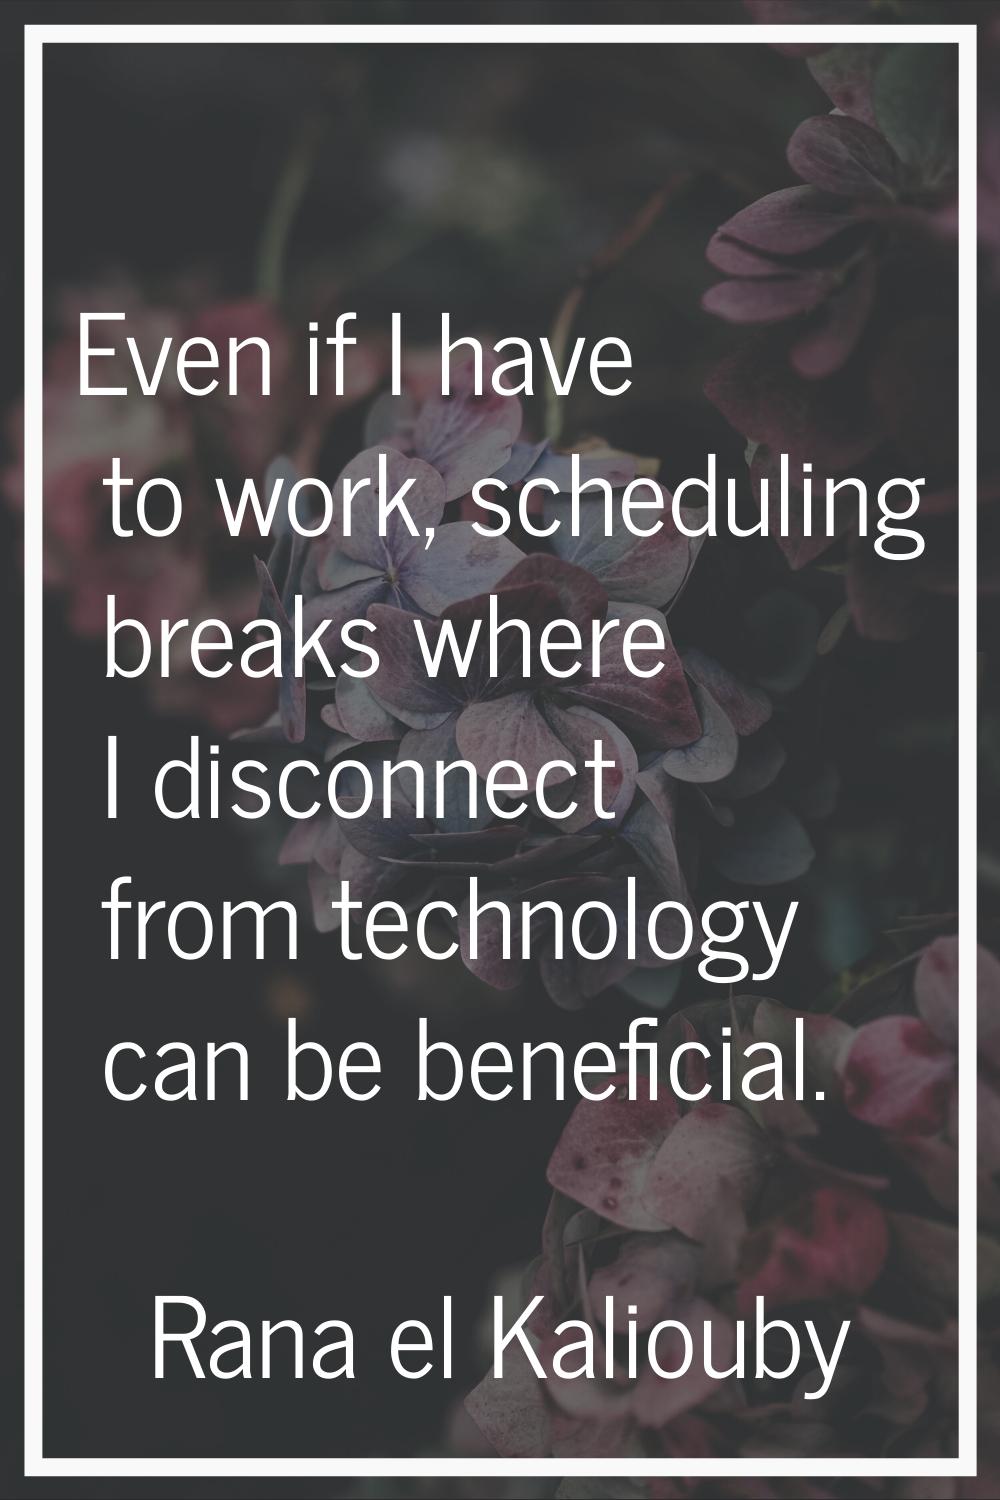 Even if I have to work, scheduling breaks where I disconnect from technology can be beneficial.